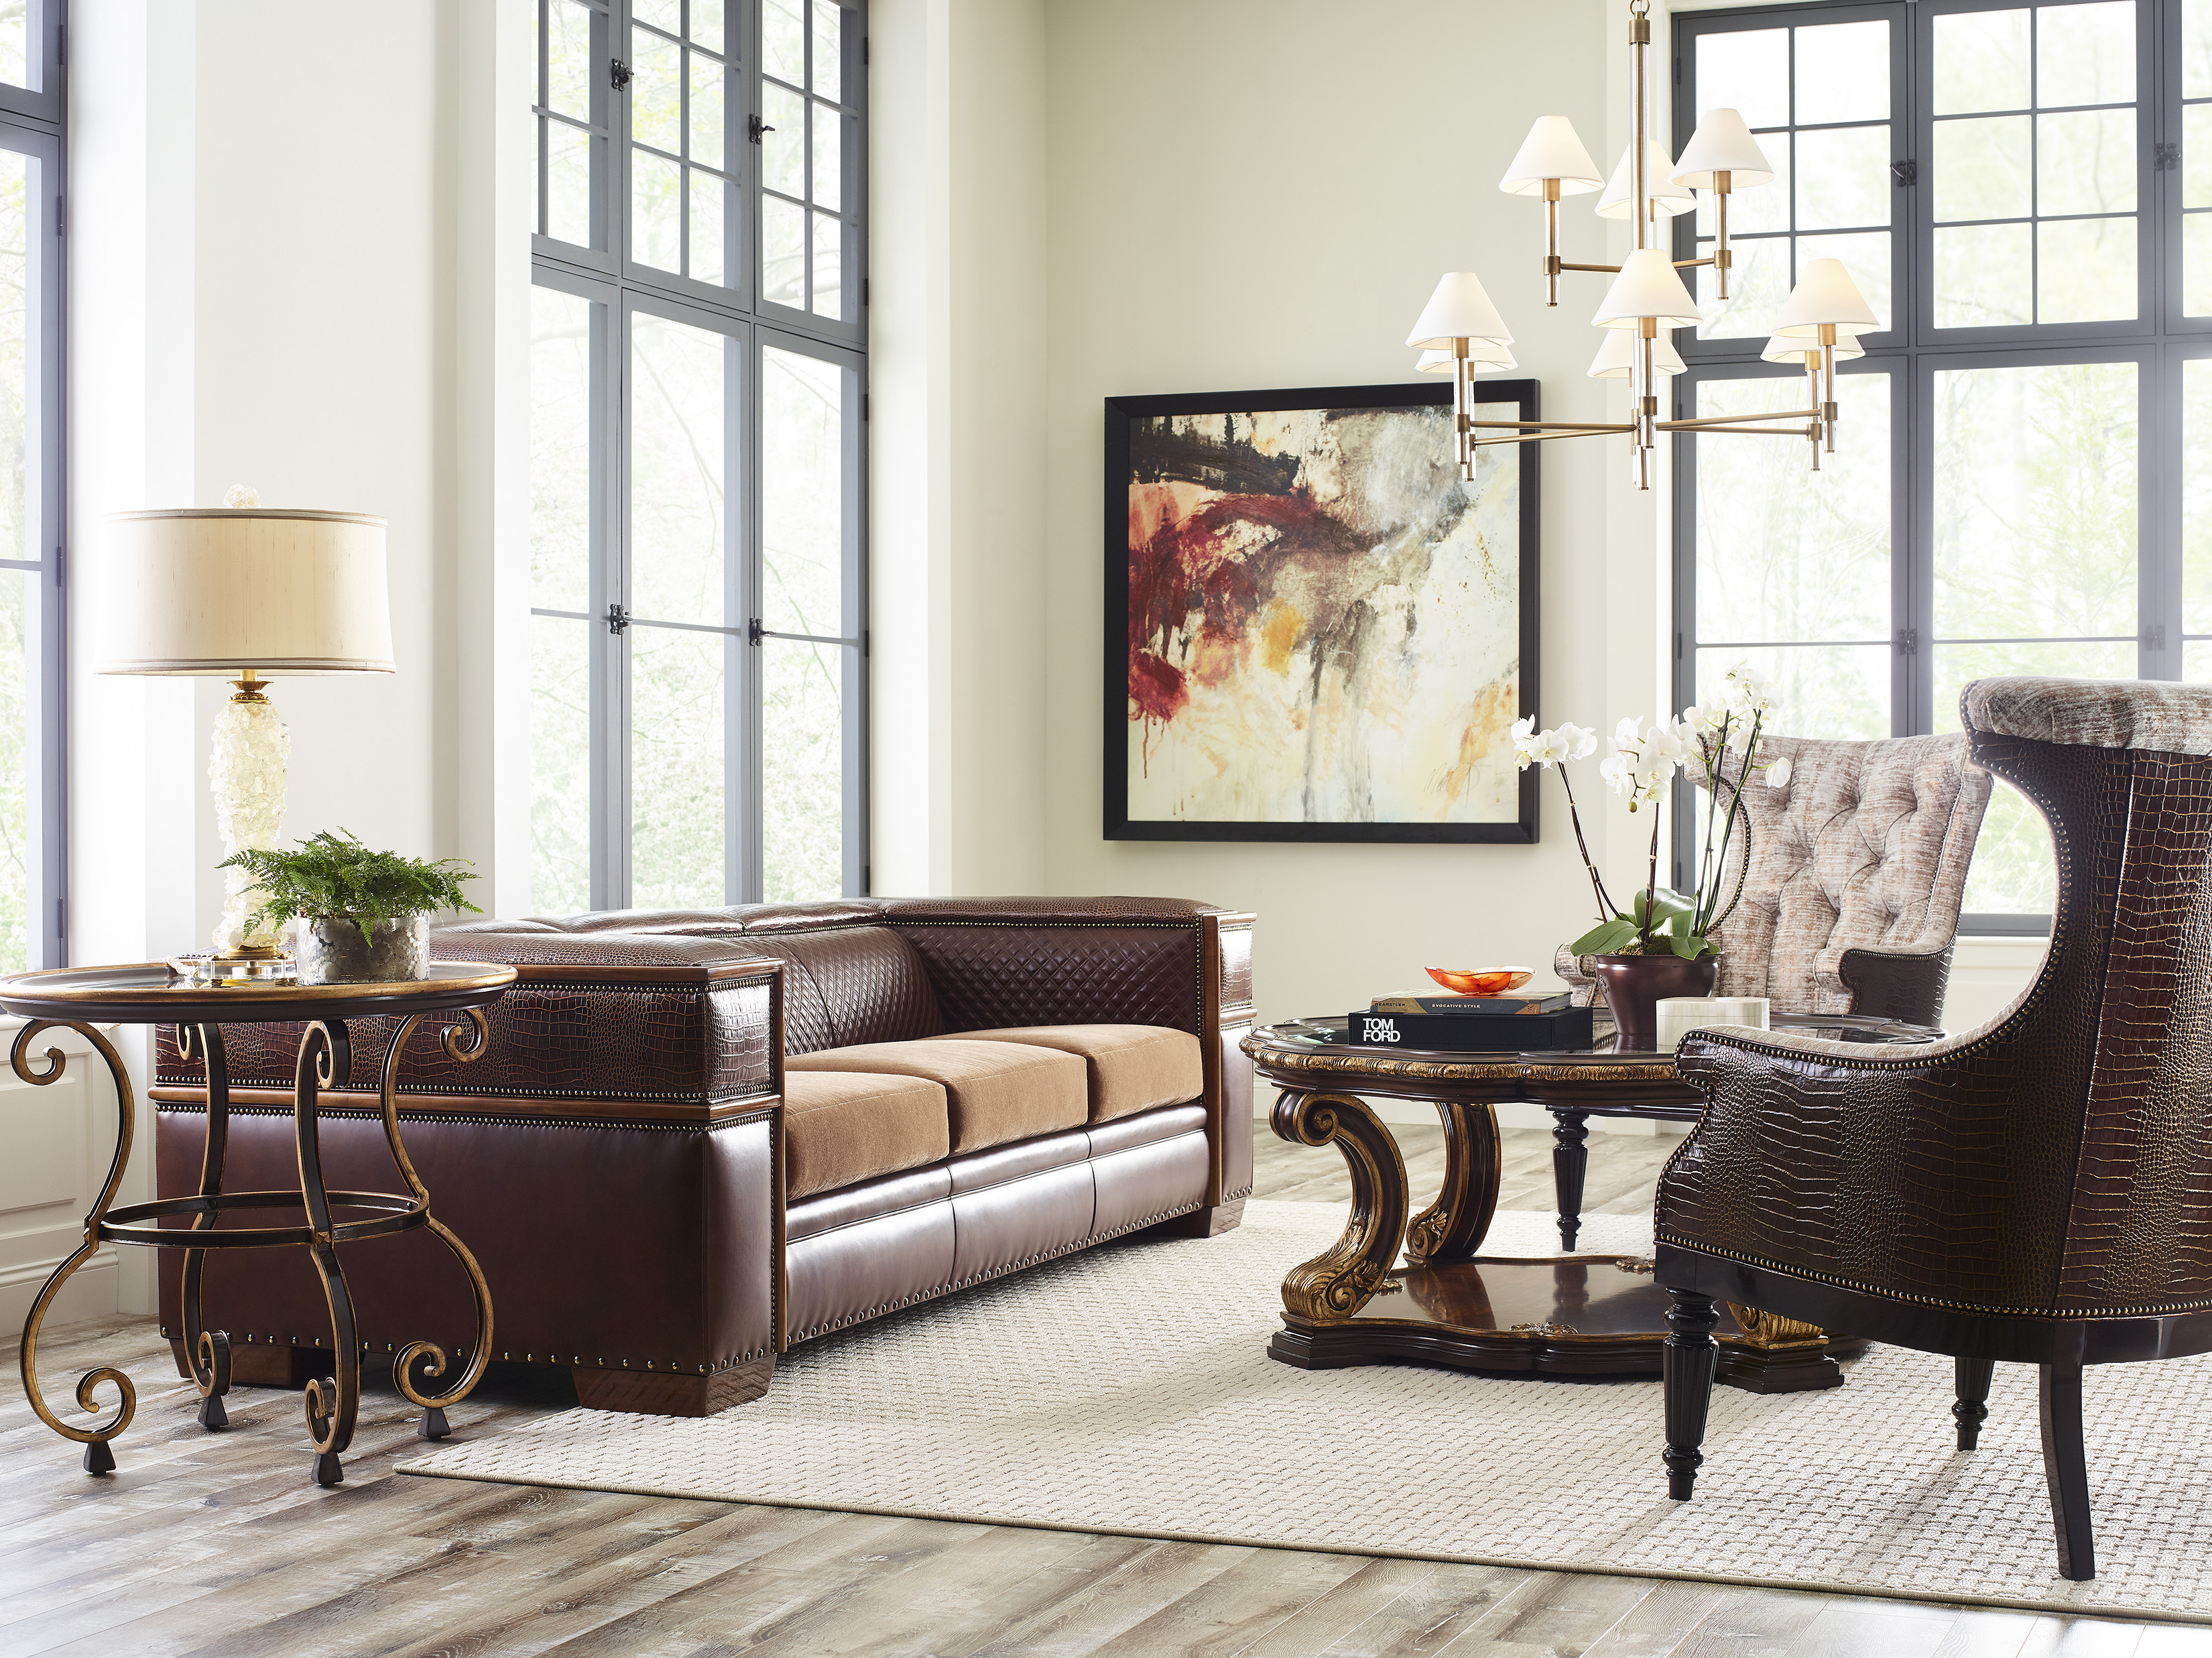 Terrace Sofa shown in Tilton Moose, Allie Java and Nevada Fawn combo with Rainier finish and G & H nails.  Artist Chair shown in Allie Java and Gusto Bronze combo with Brilliance finish and H nails.